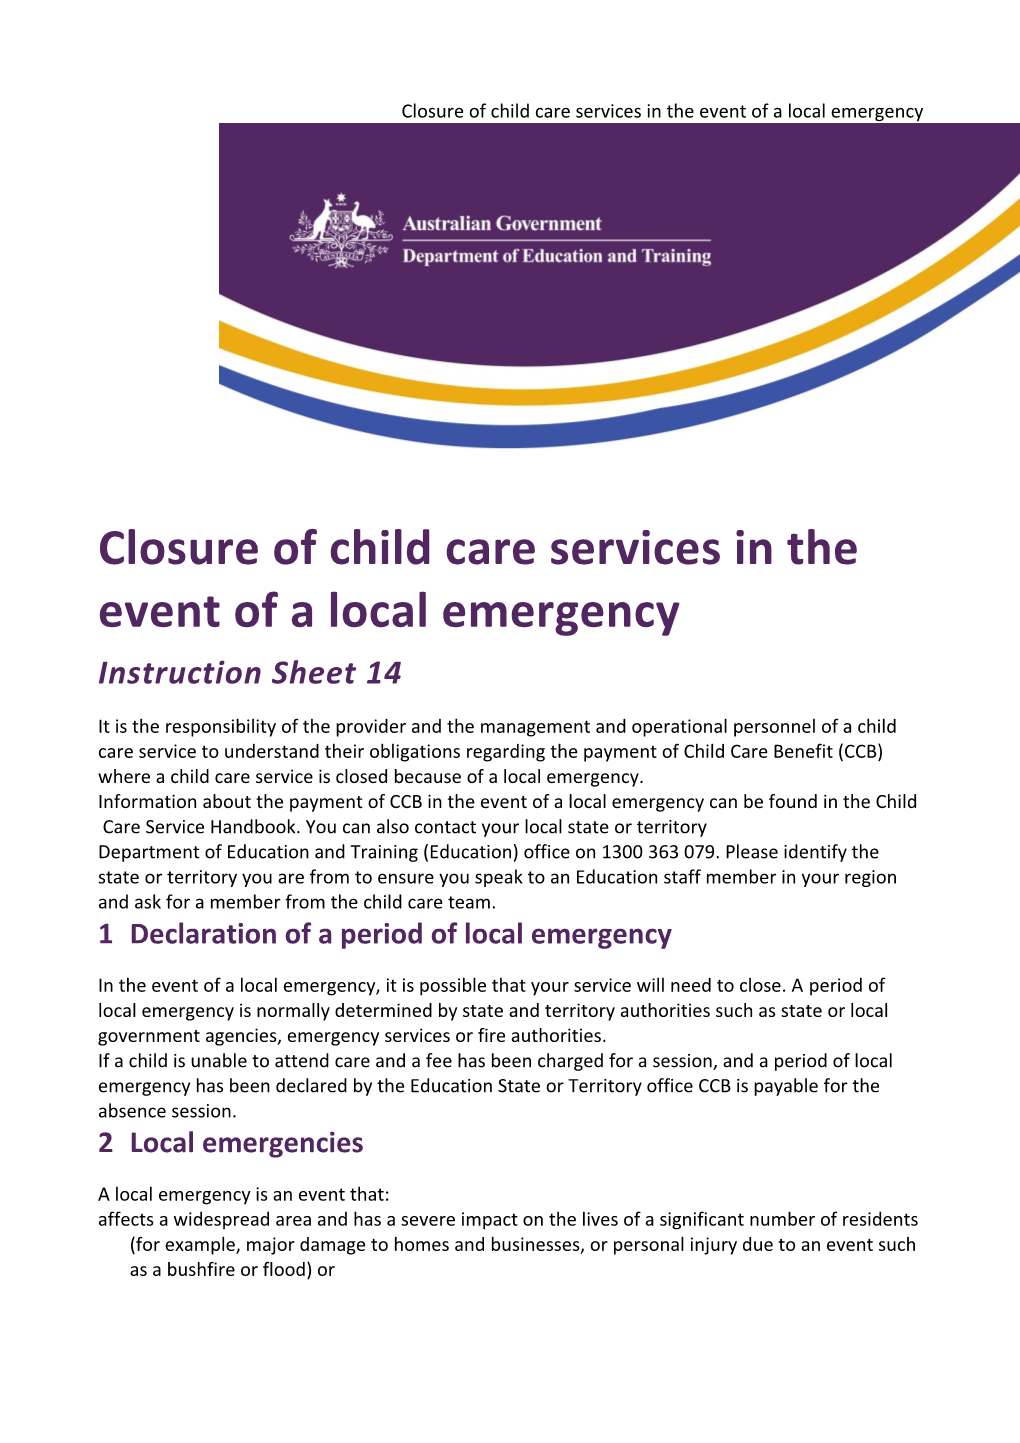 Closure of Child Care Services in the Event of a Local Emergency